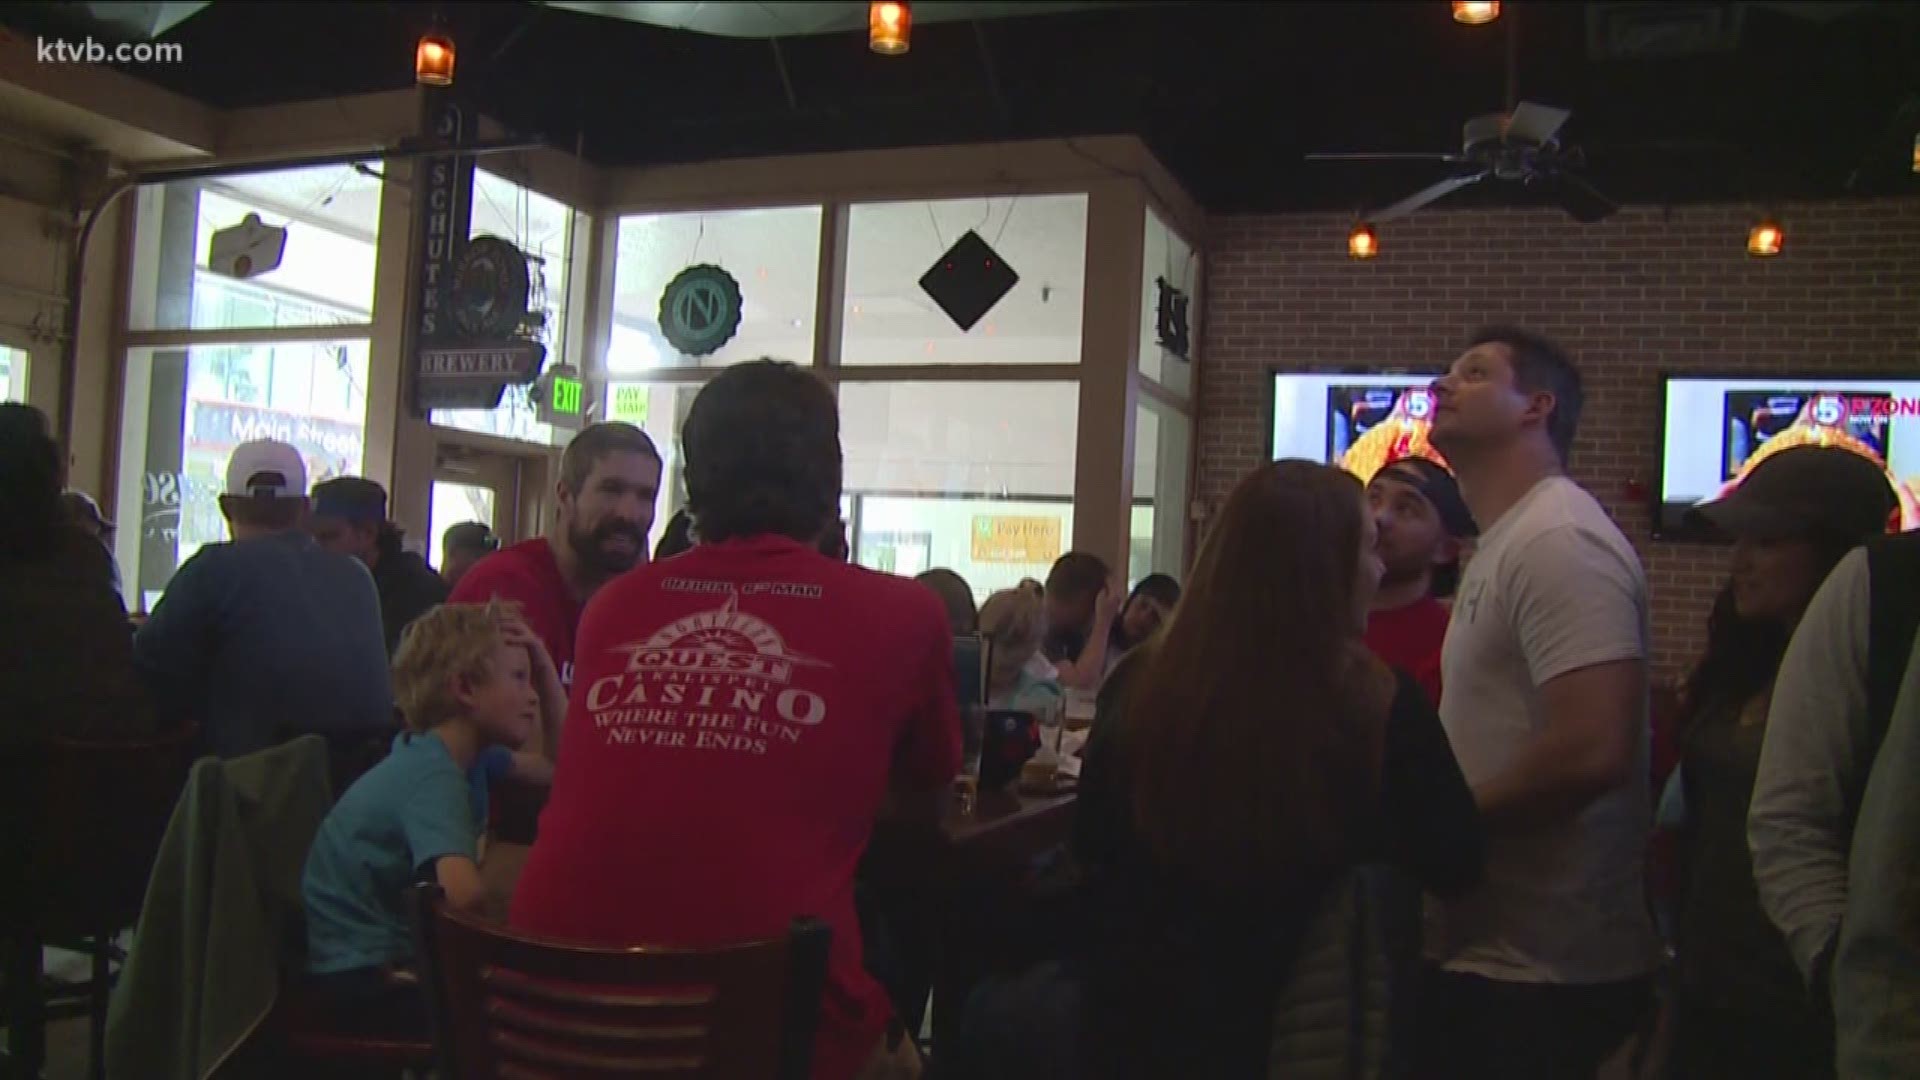 Gonzaga fans gathered at the Taphouse, whose owner is a Gonzaga graduate, in Boise to watch their game against the Texas Tech Red Raiders in an Elite 8 matchup.